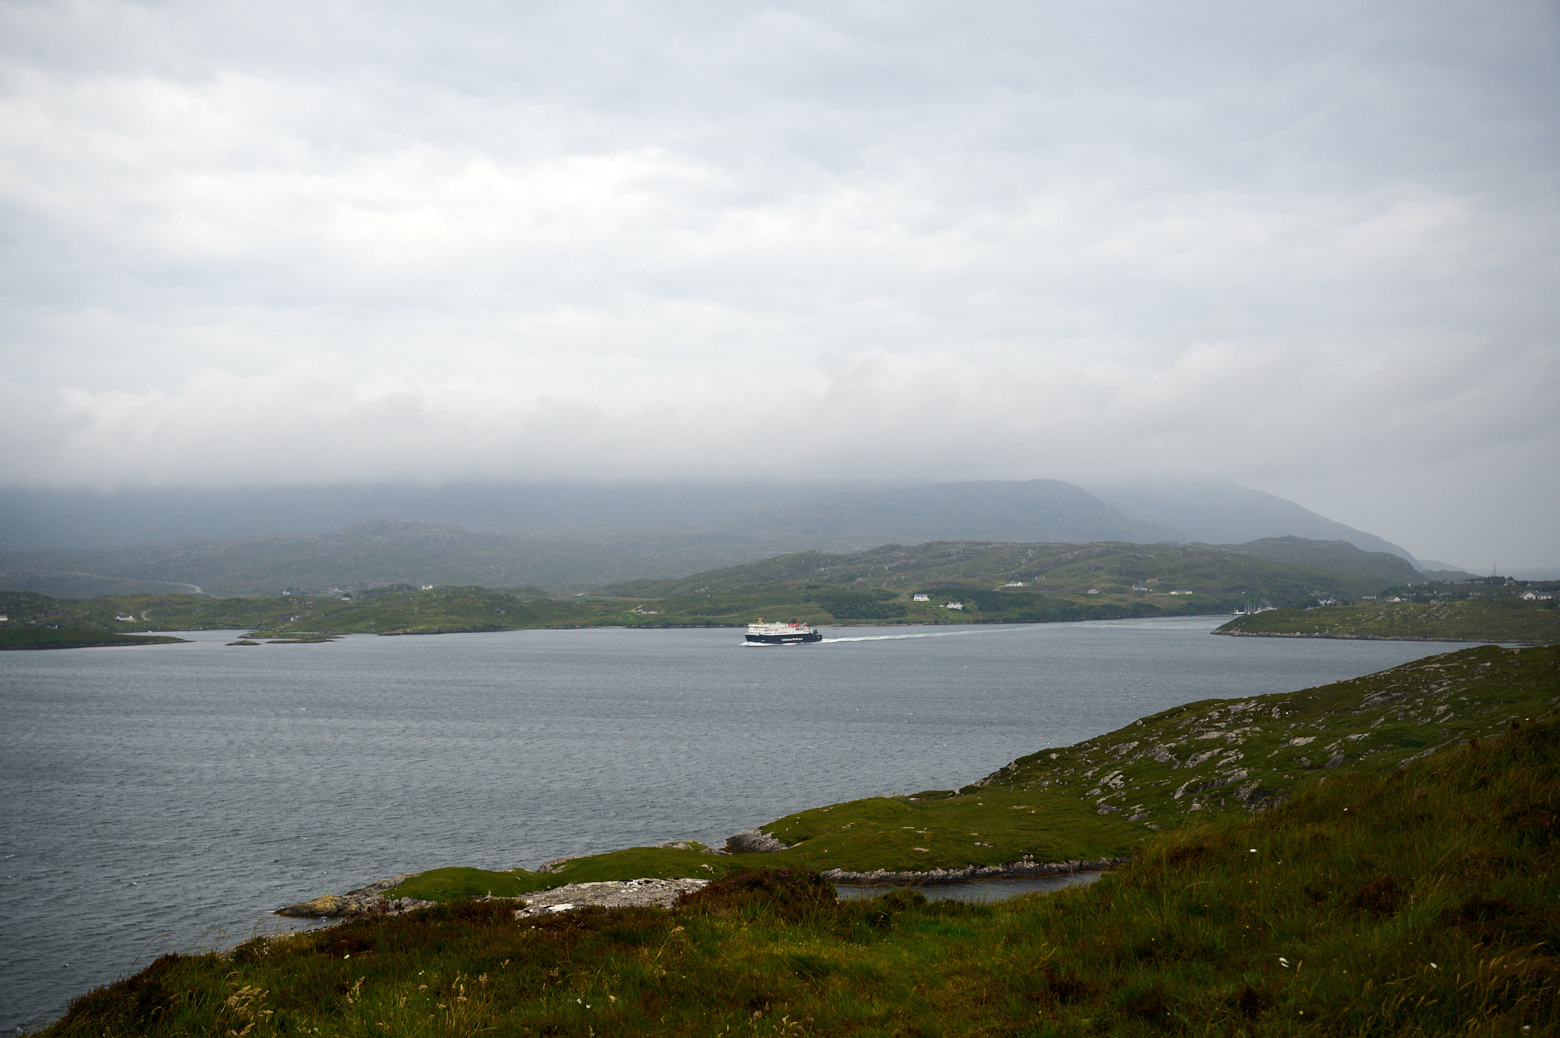 Walking to Eilean GLass Lighthouse in Harris, Outer Hebrides